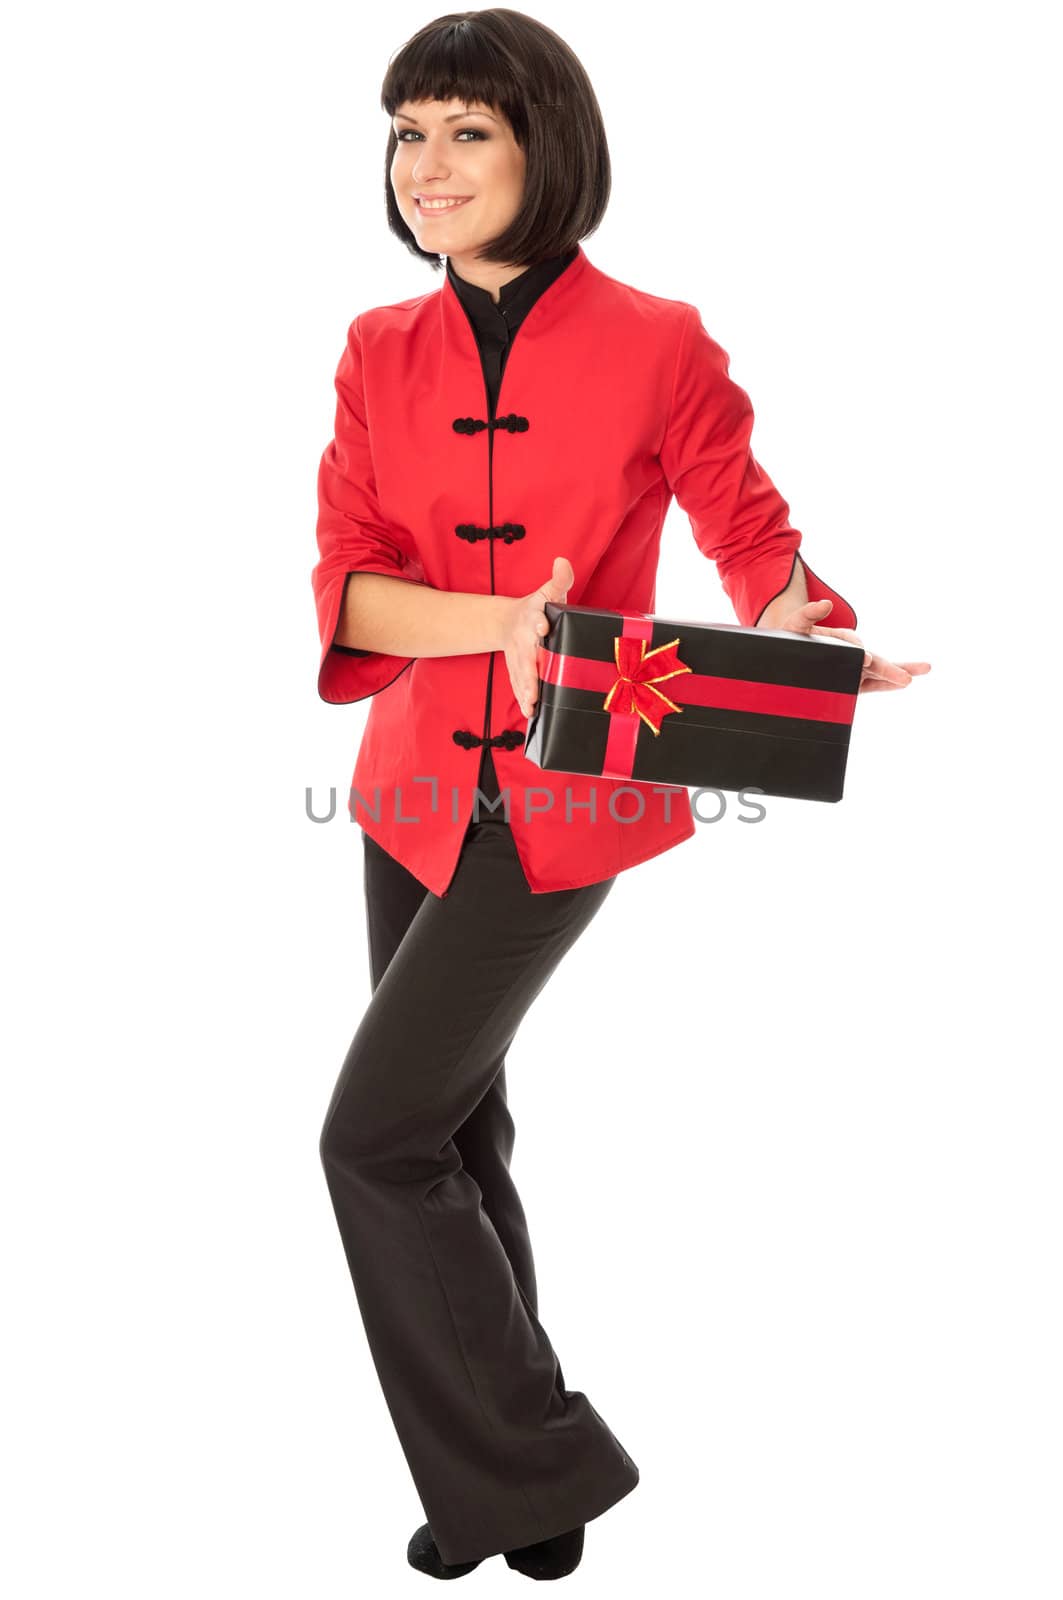 woman holding a black box with red bow as a gift